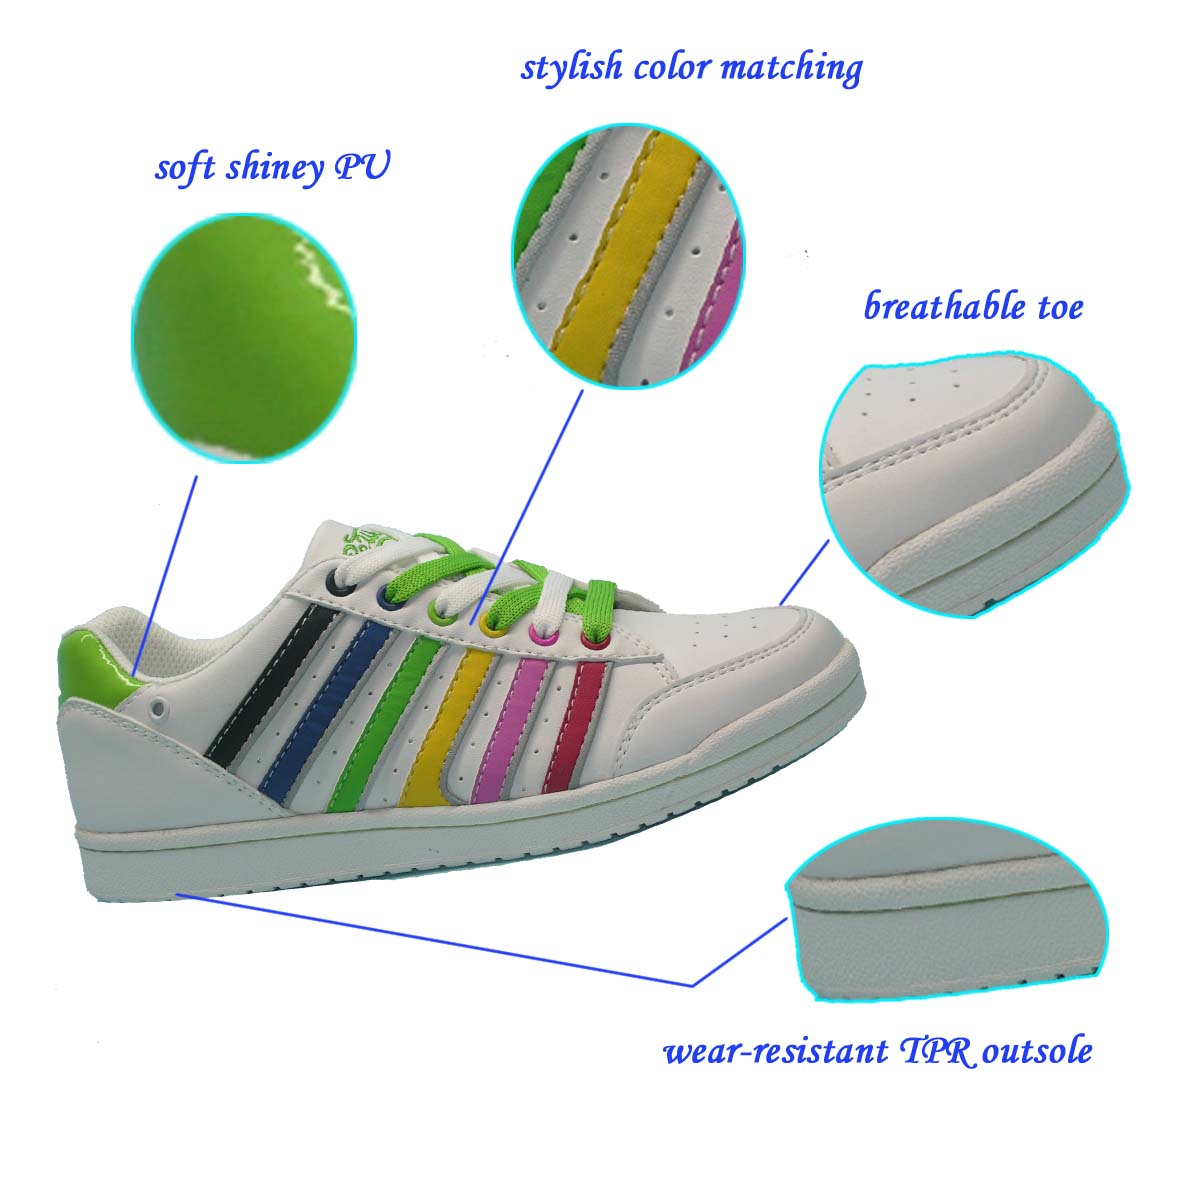 Latest Style Women's Colorful Casual/Skate Shoes Made in China with PU upper,TPR outsole